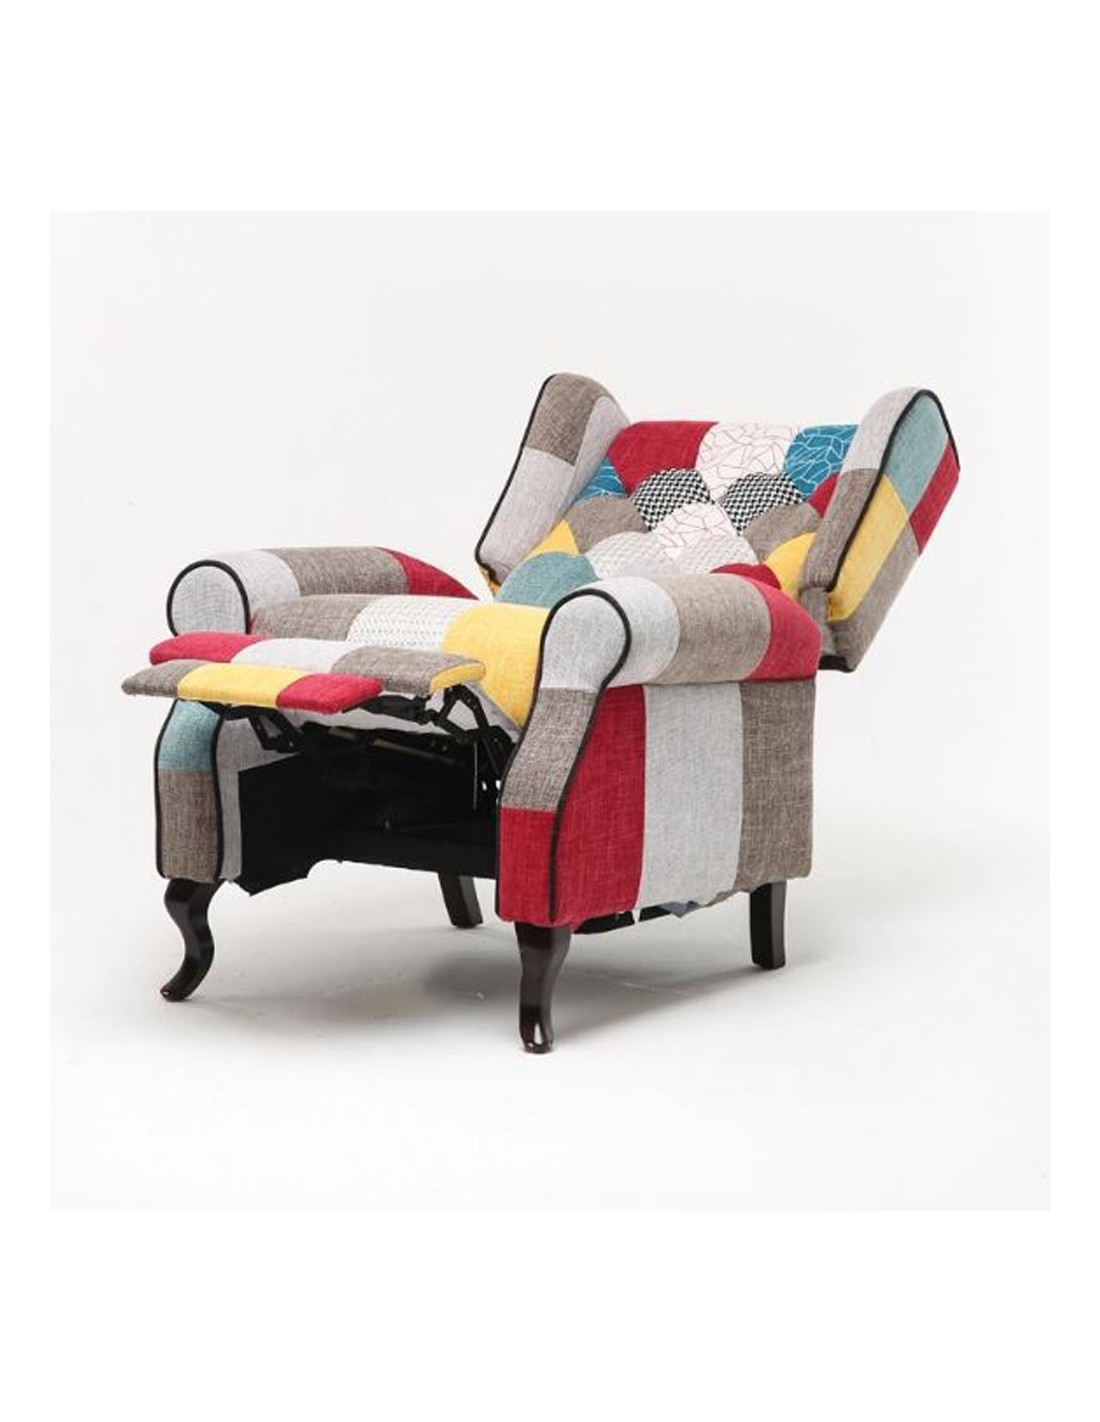 Poltrona Relax Patchwork